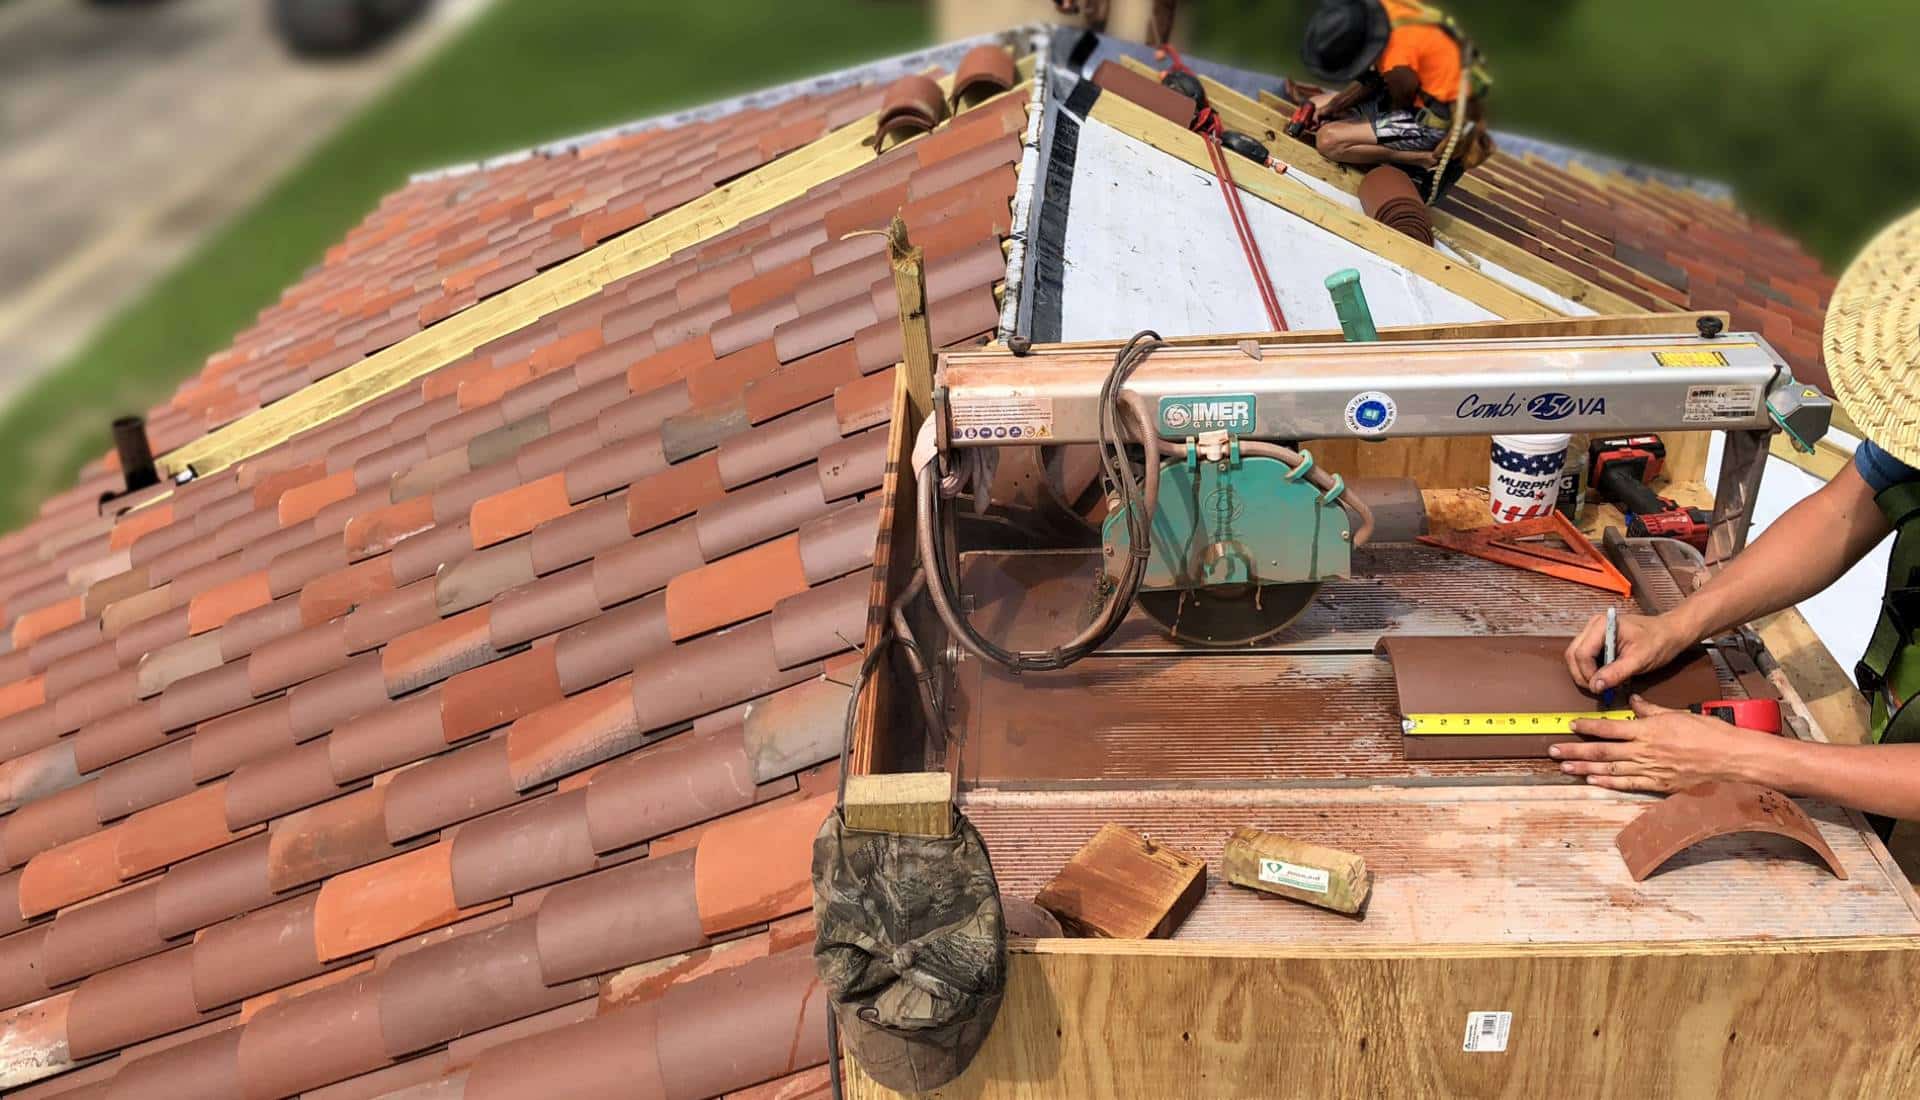 Clay tile roofing work